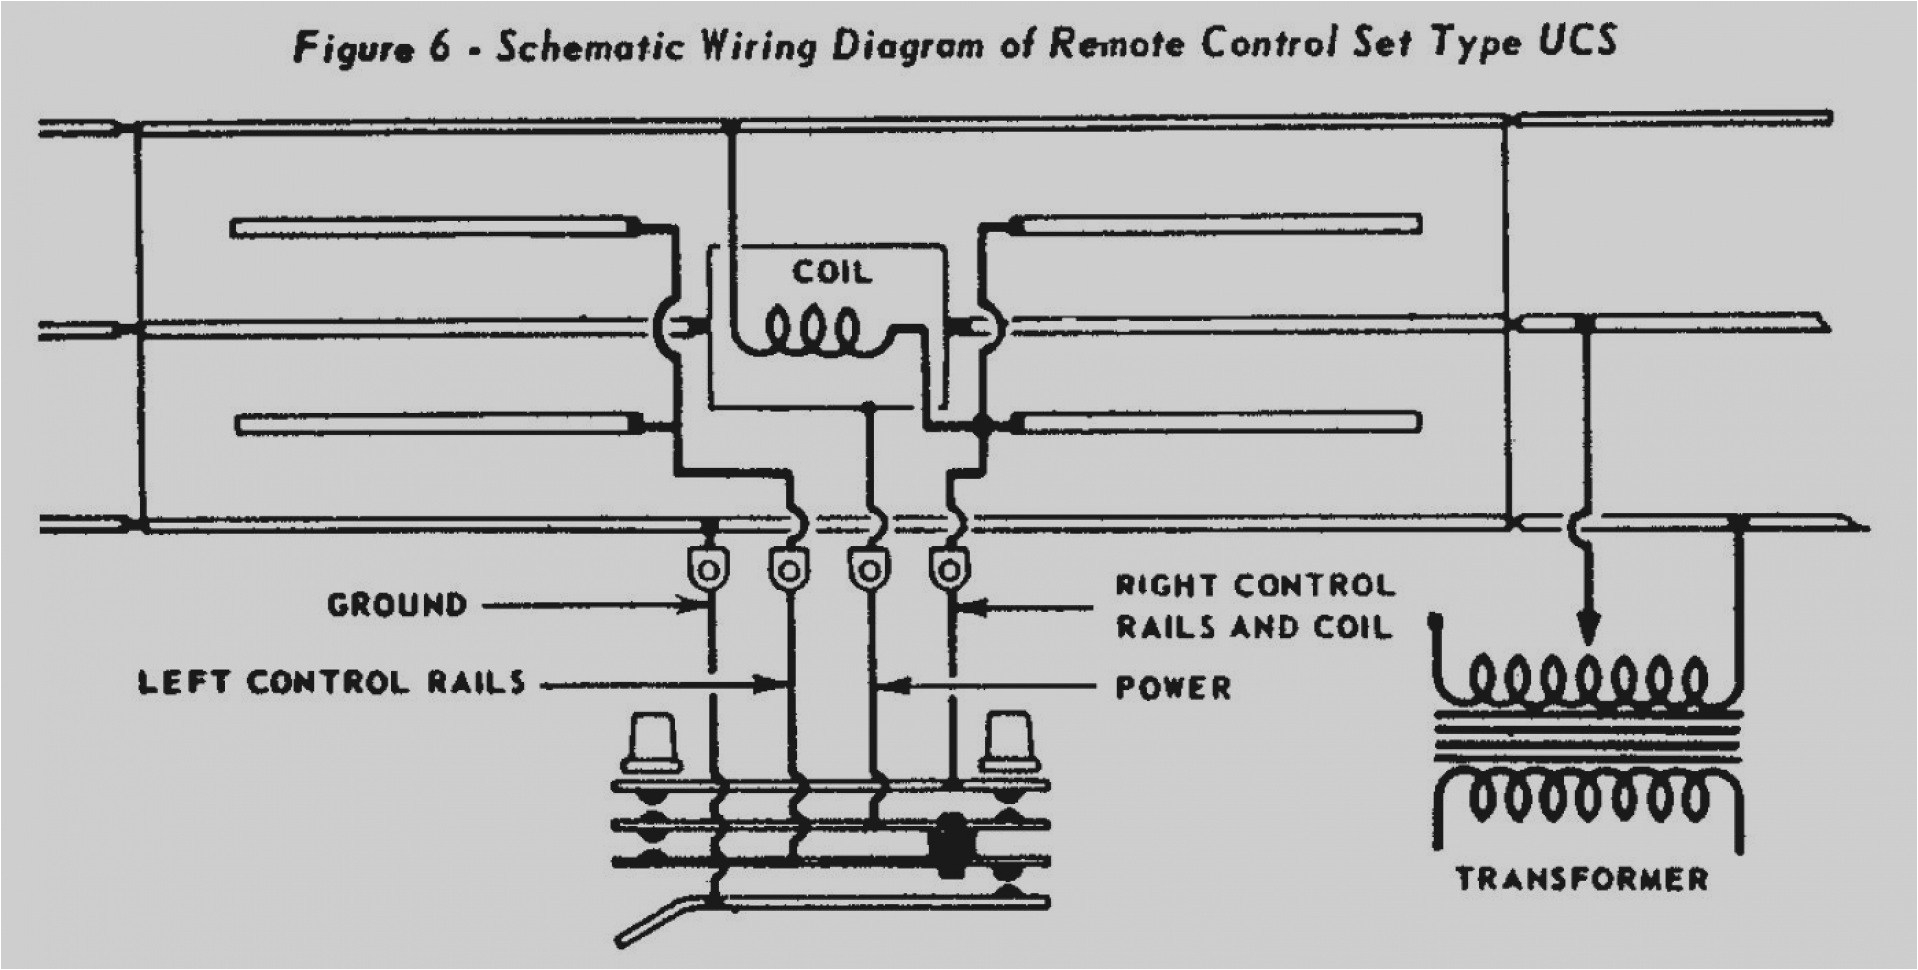 lionel whistle wiring diagrams wiring diagram amelionel wiring schematics wiring diagram user lionel whistle wiring diagrams